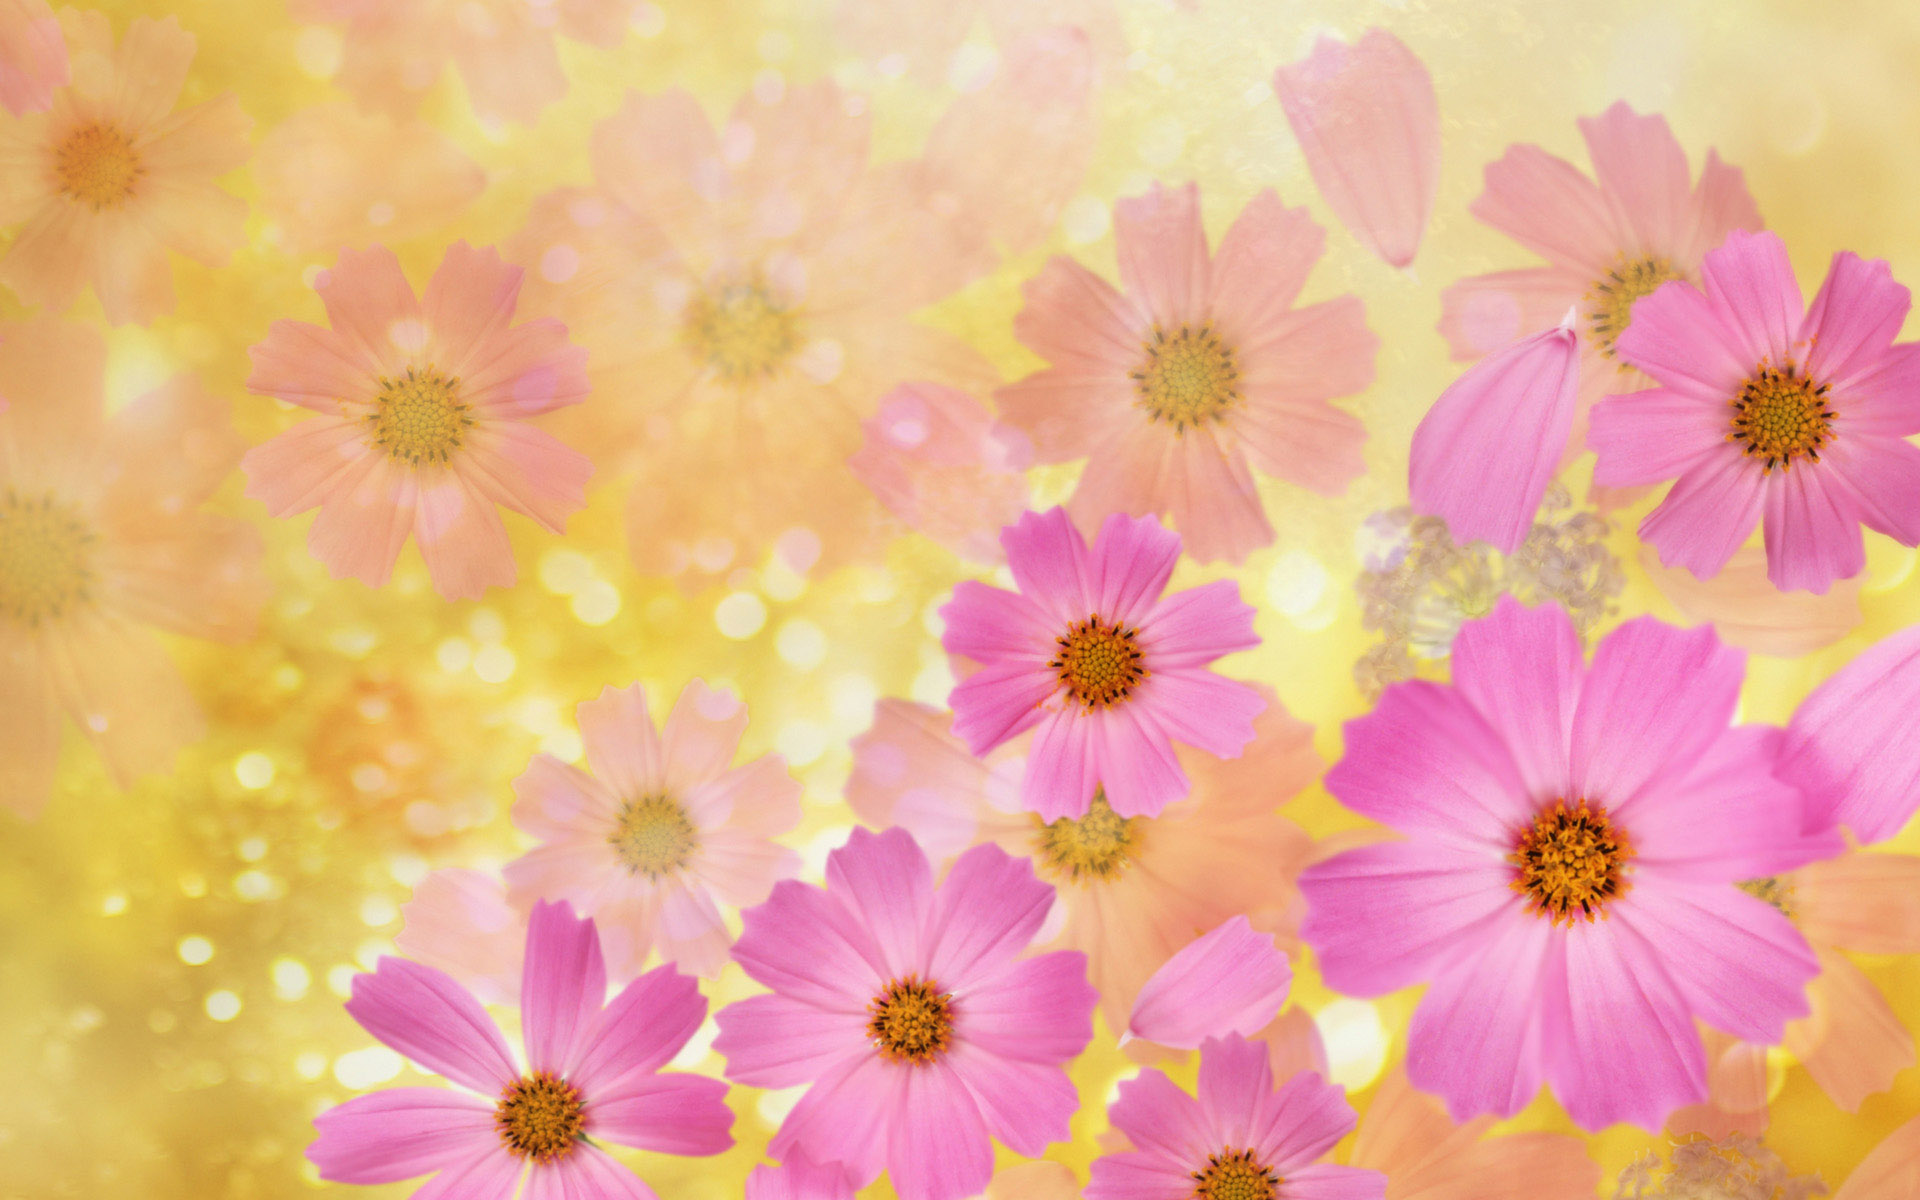 Cosmos Flowers Wallpaper High Quality